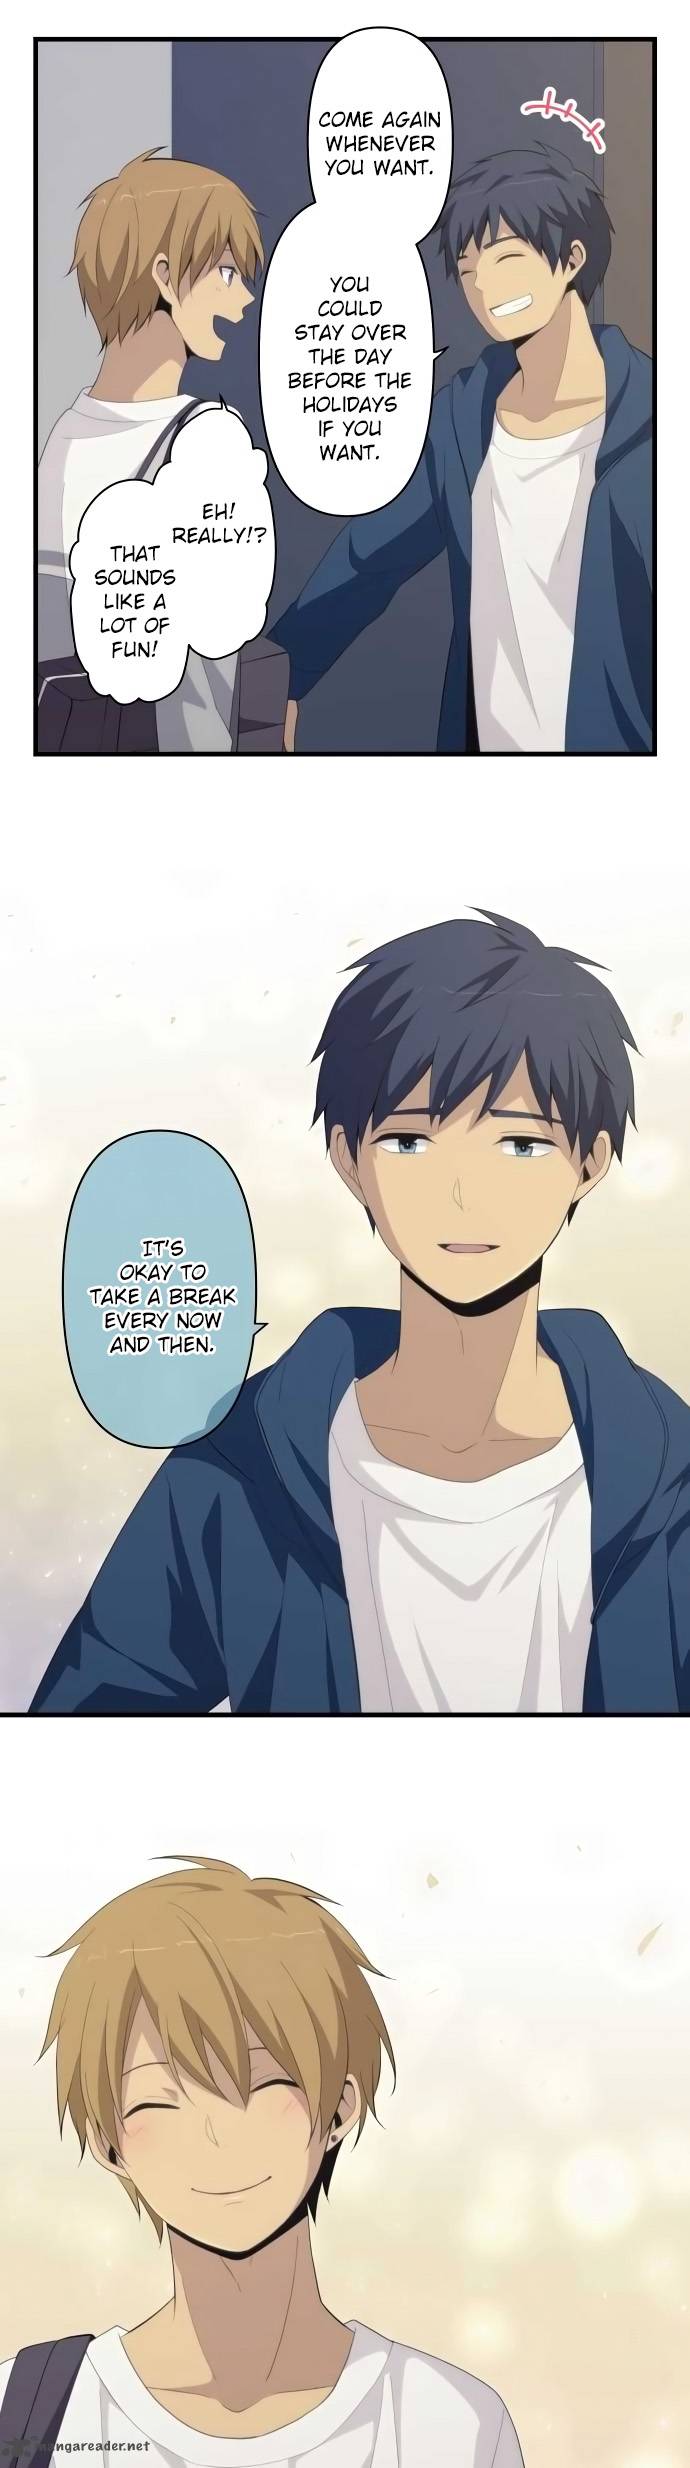 Relife 171 19